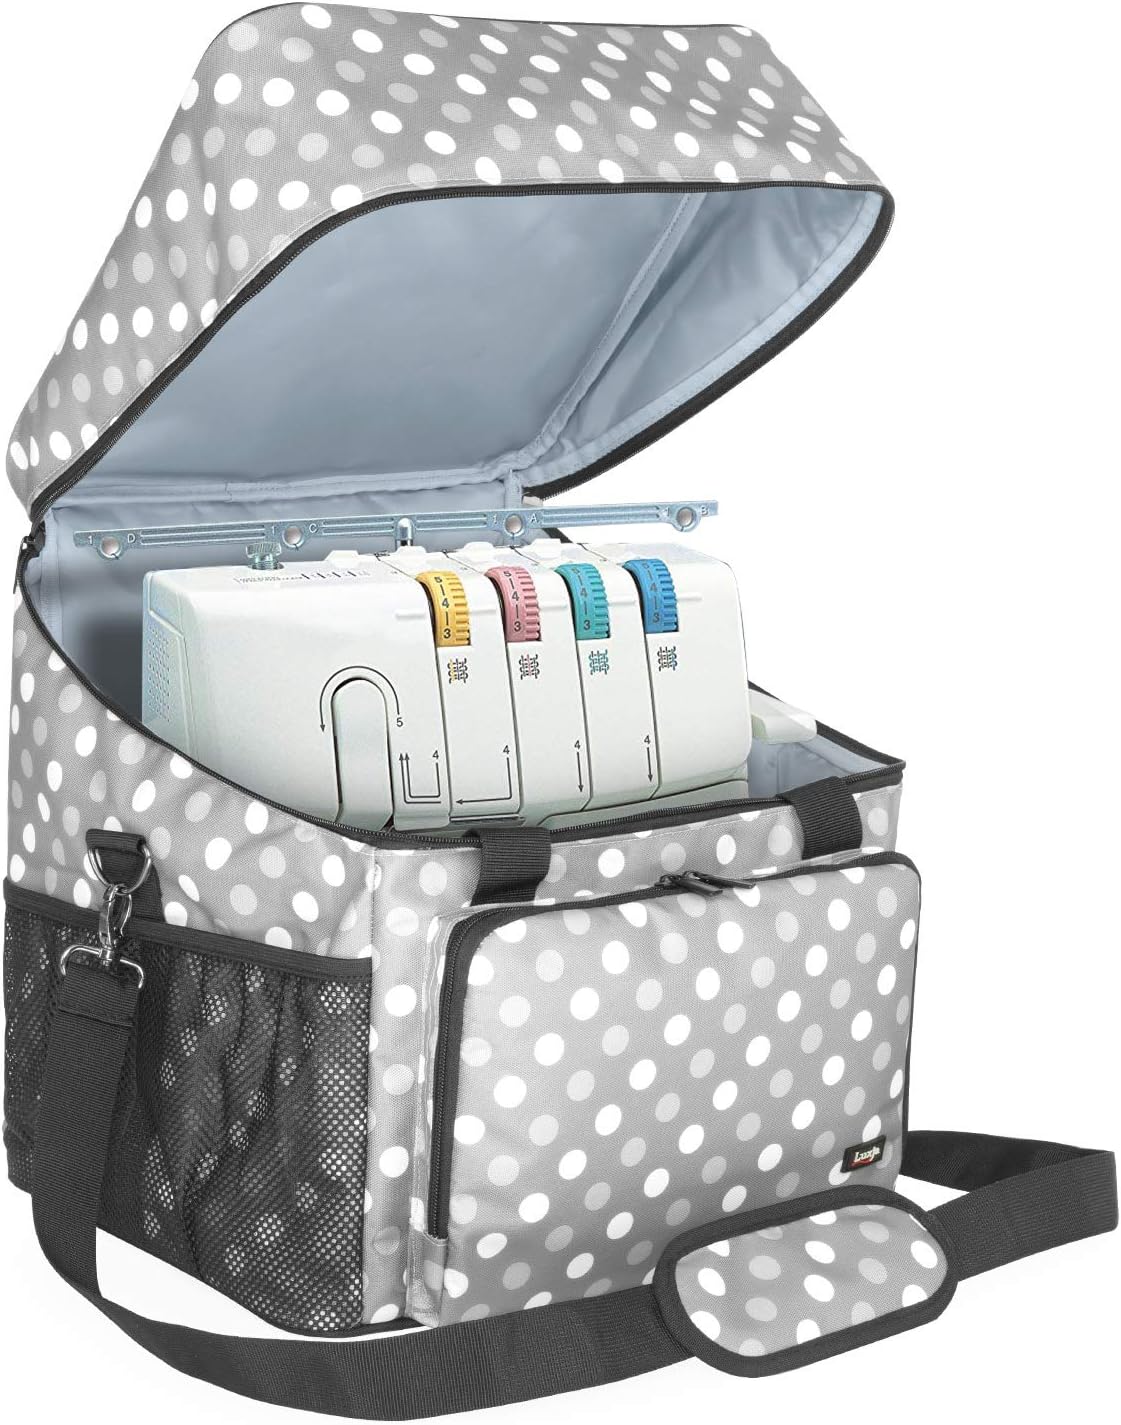 LUXJA Serger Case for Most Standard Overlock Machines, Serger Bag with Accessories Storage Pockets (Patented Design), Gray Dots